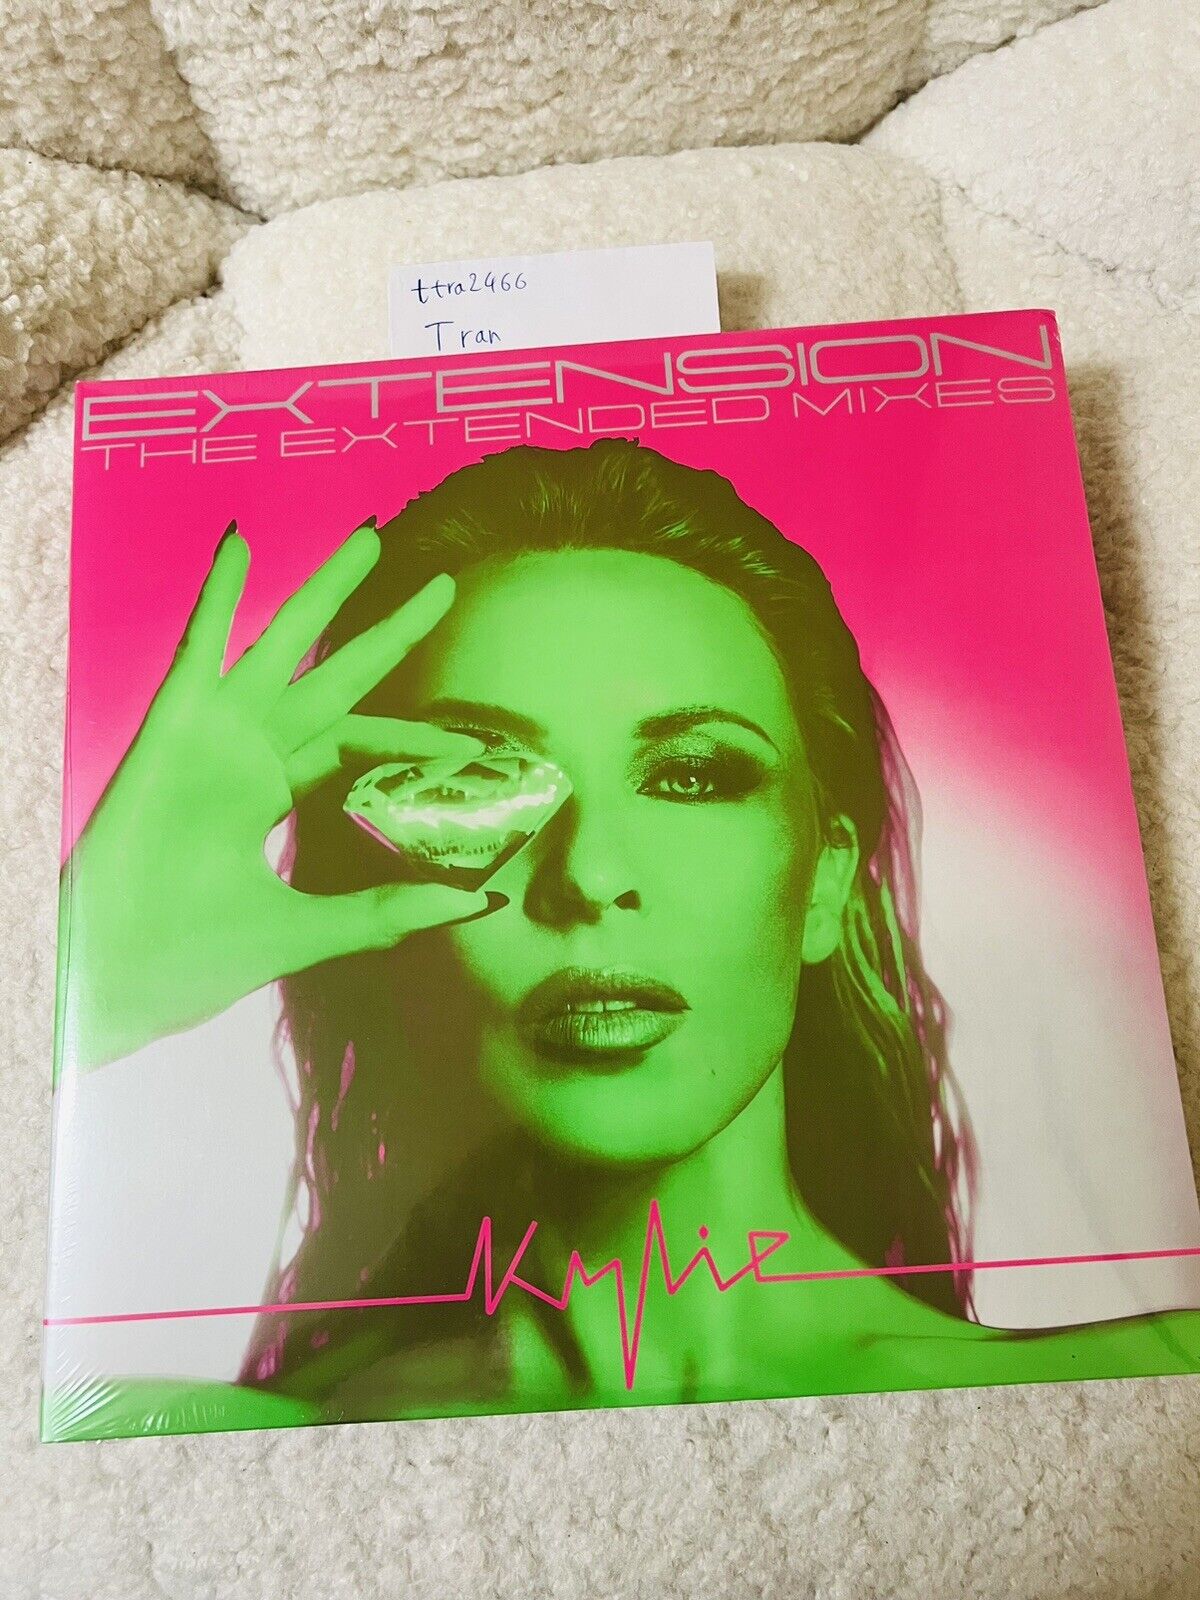 Kylie Minogue - Exension The Extended Mixes Vinyl LP